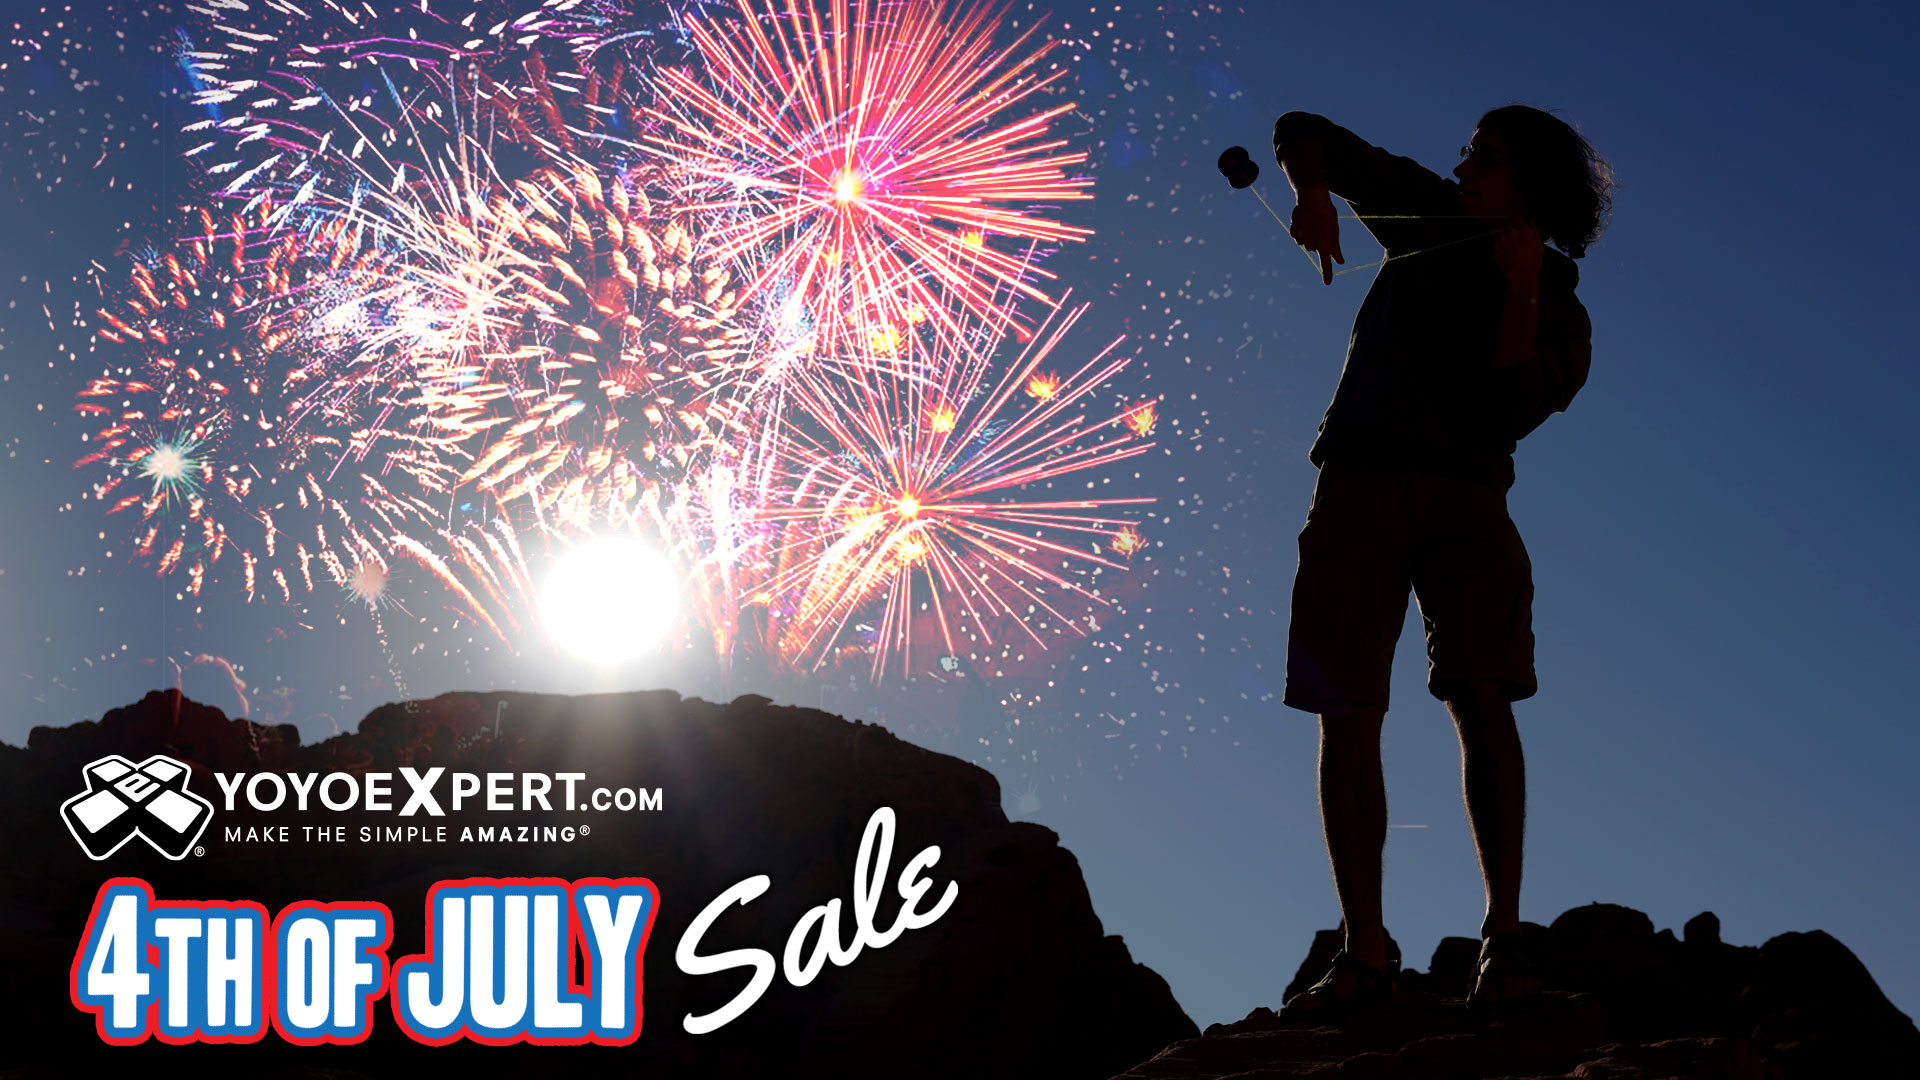 4th of July Sale 2021